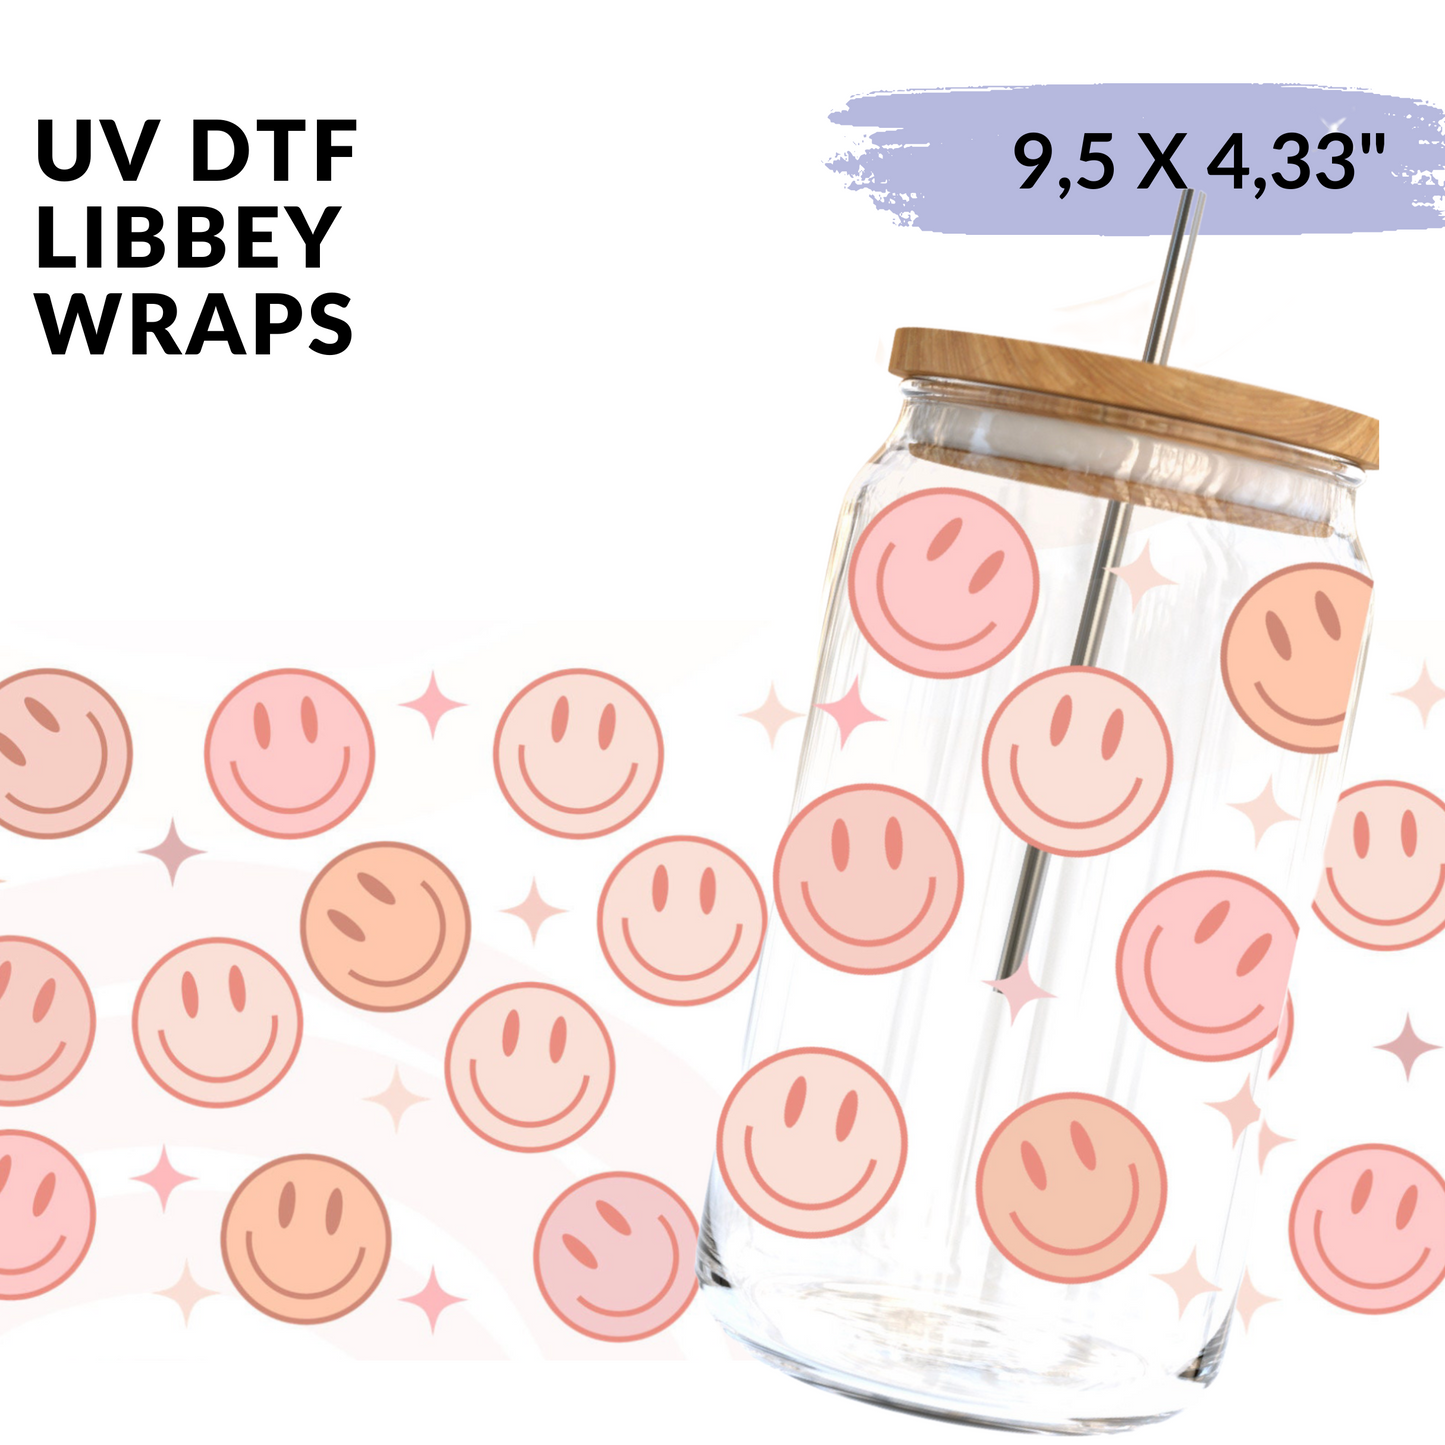 UV DTF - Smile Faces and stars Libbey cup Wrap